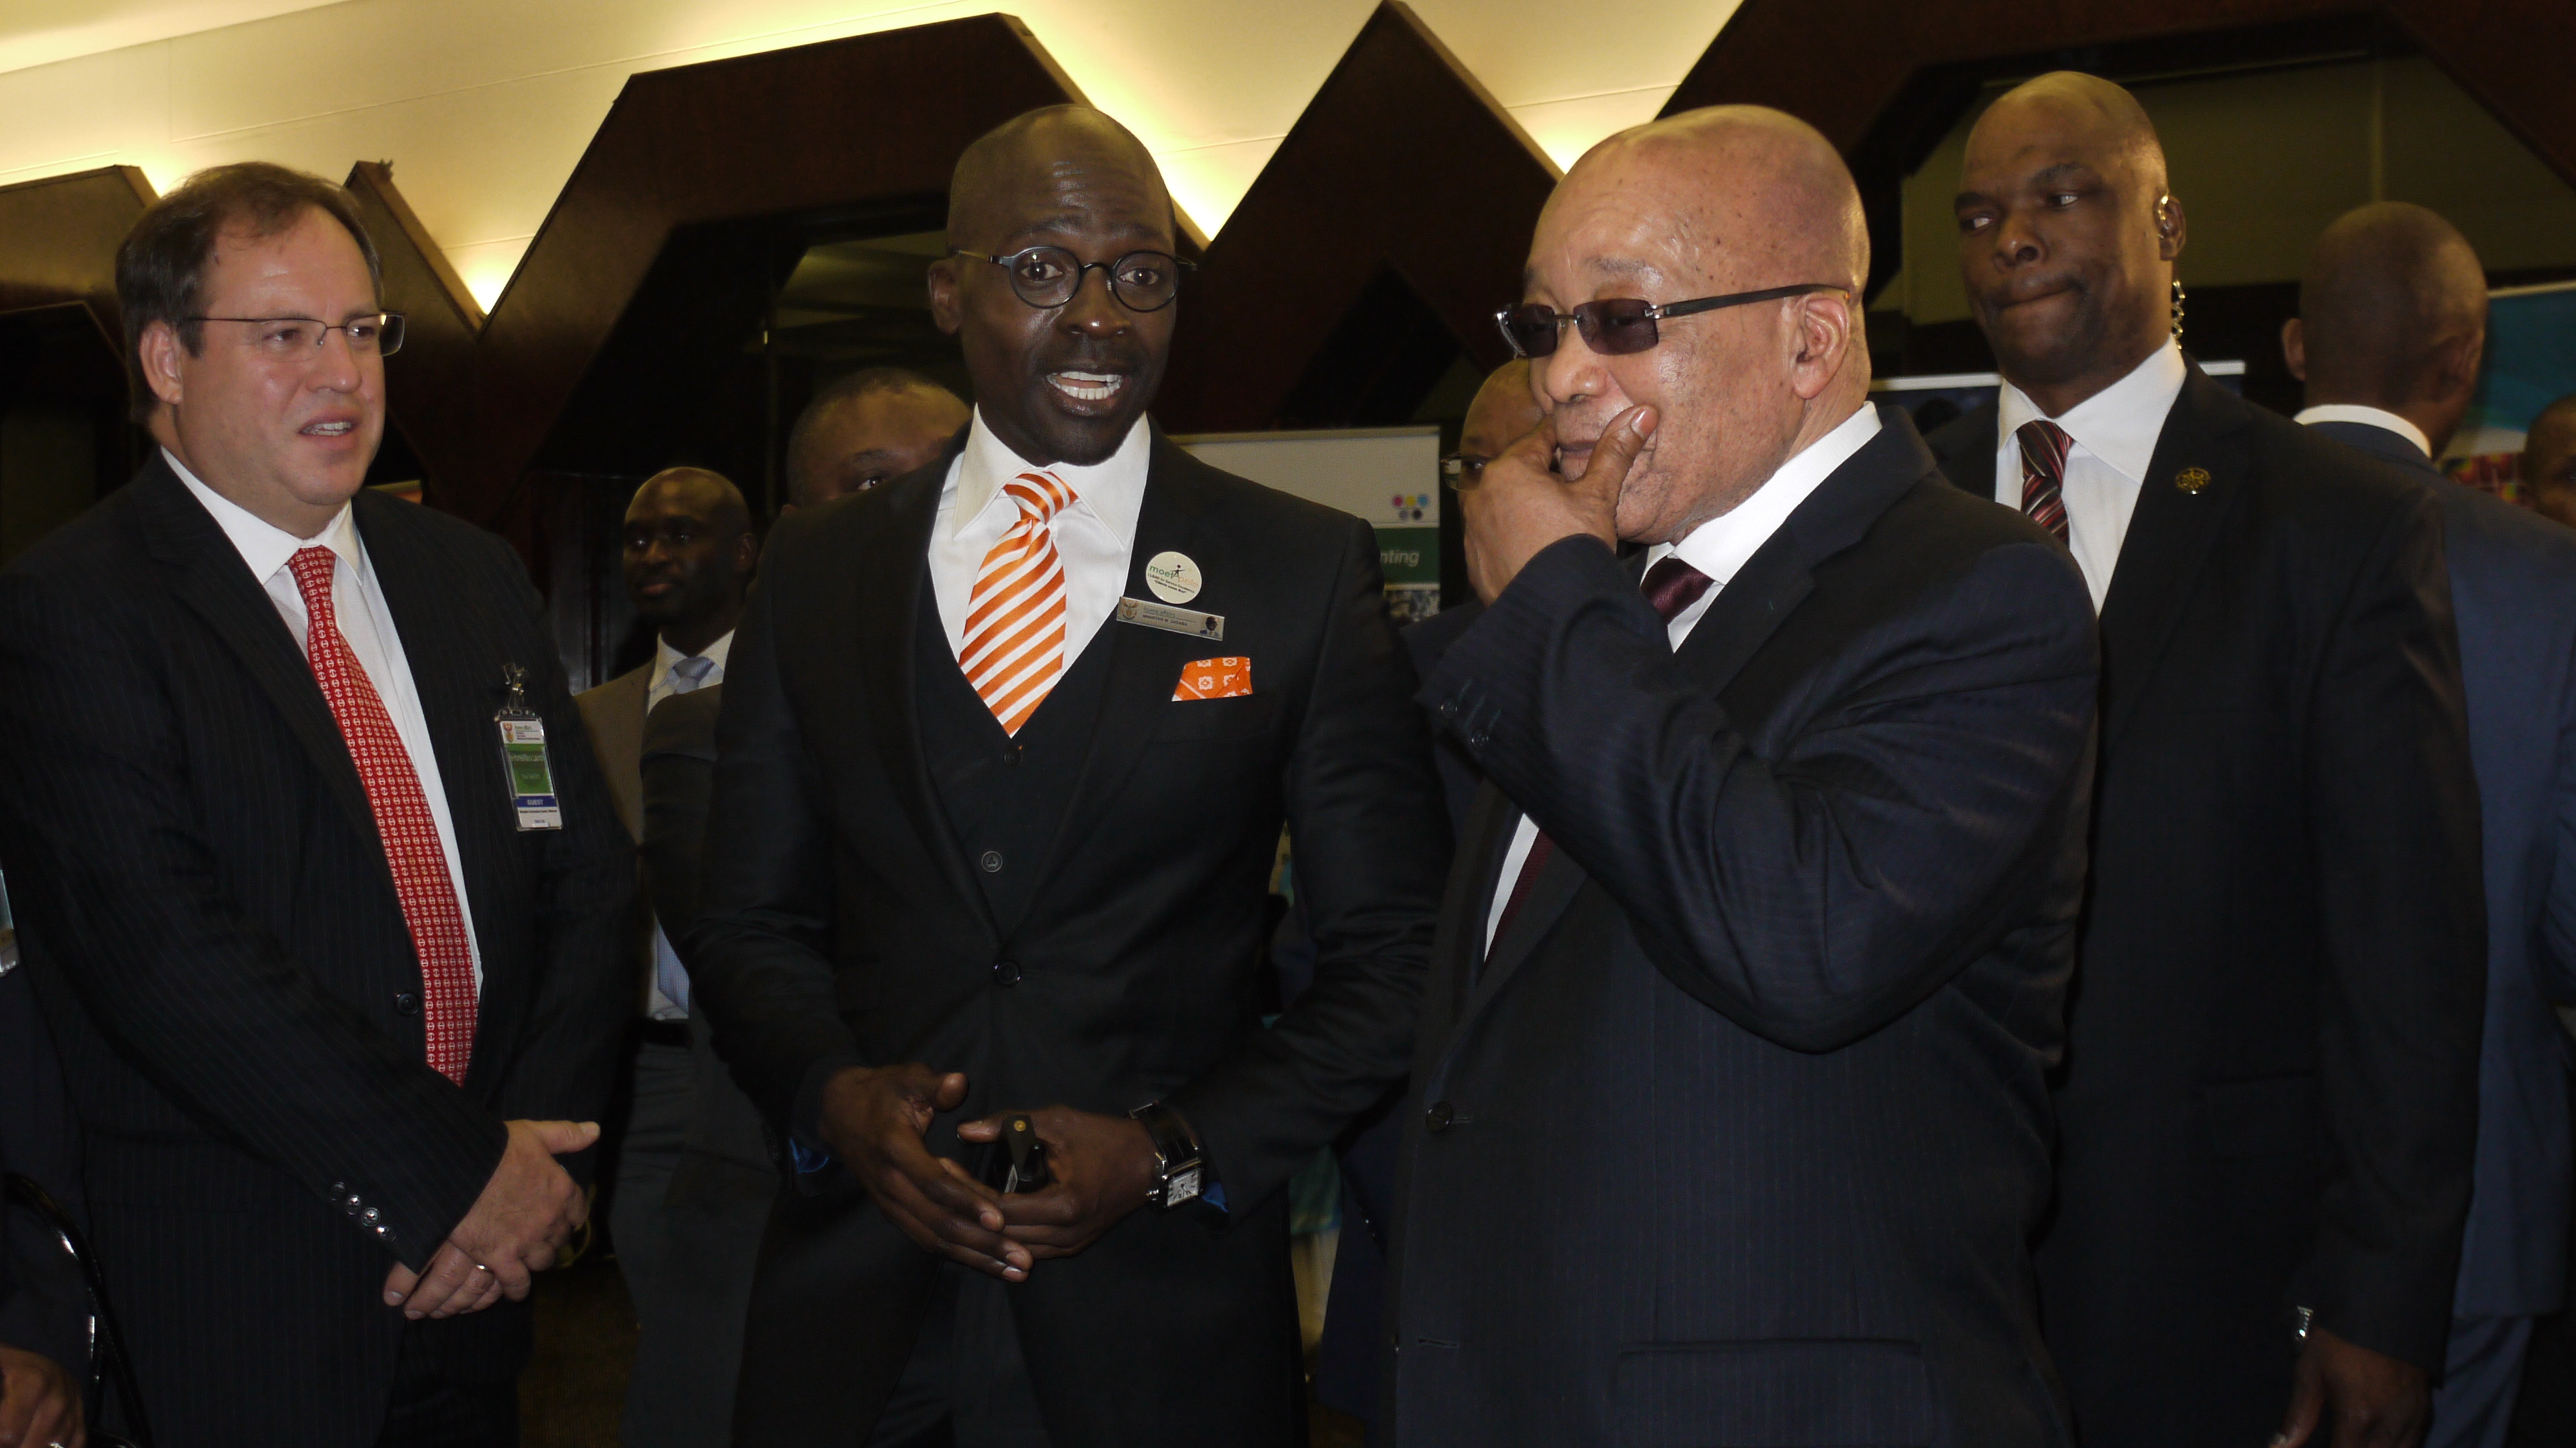 Minister of Home Affairs, Malusi Gigaba, takes President Jacob Zuma on a tour of the bank centre demonstration exhibit